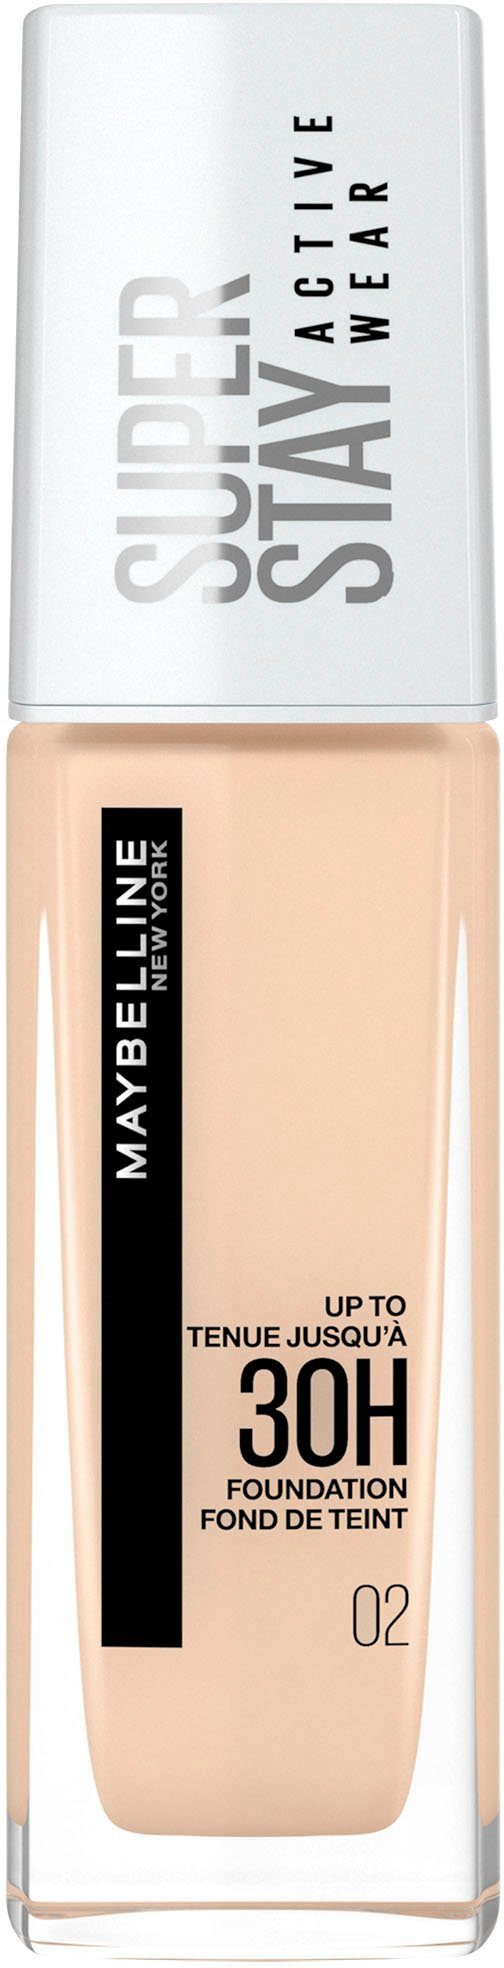 2 MAYBELLINE Naked Active Ivory Super YORK Foundation NEW Stay Wear